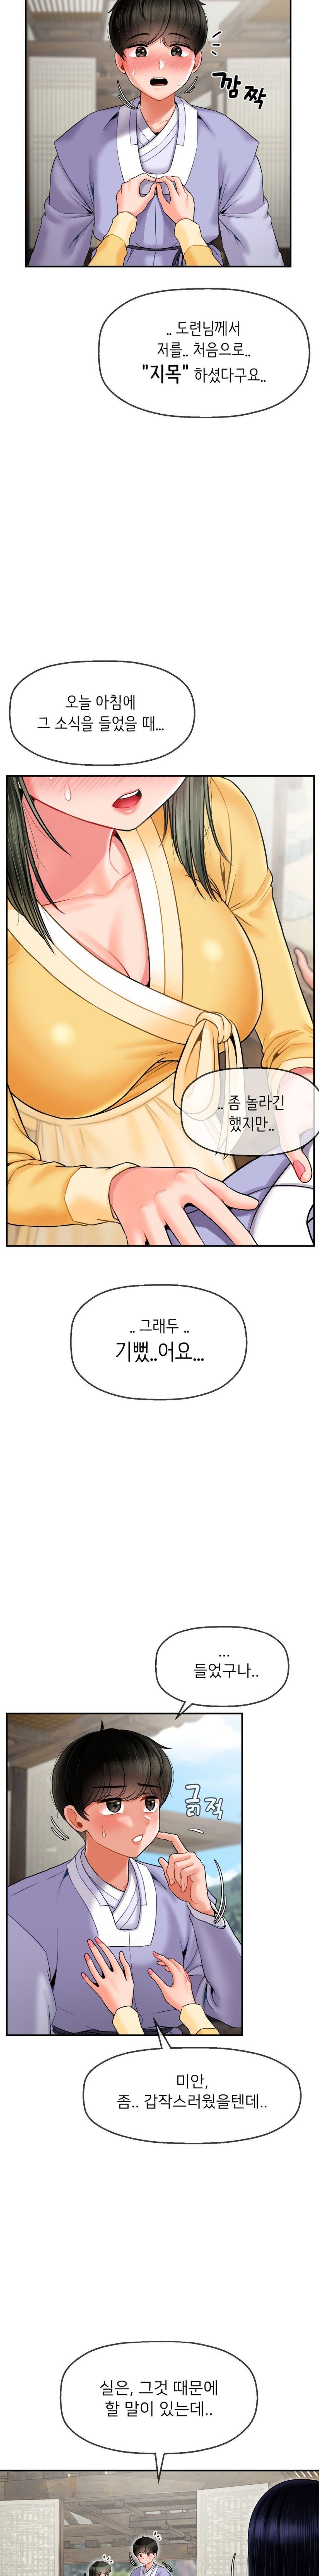 seventeenth-only-son-raw-chap-3-5